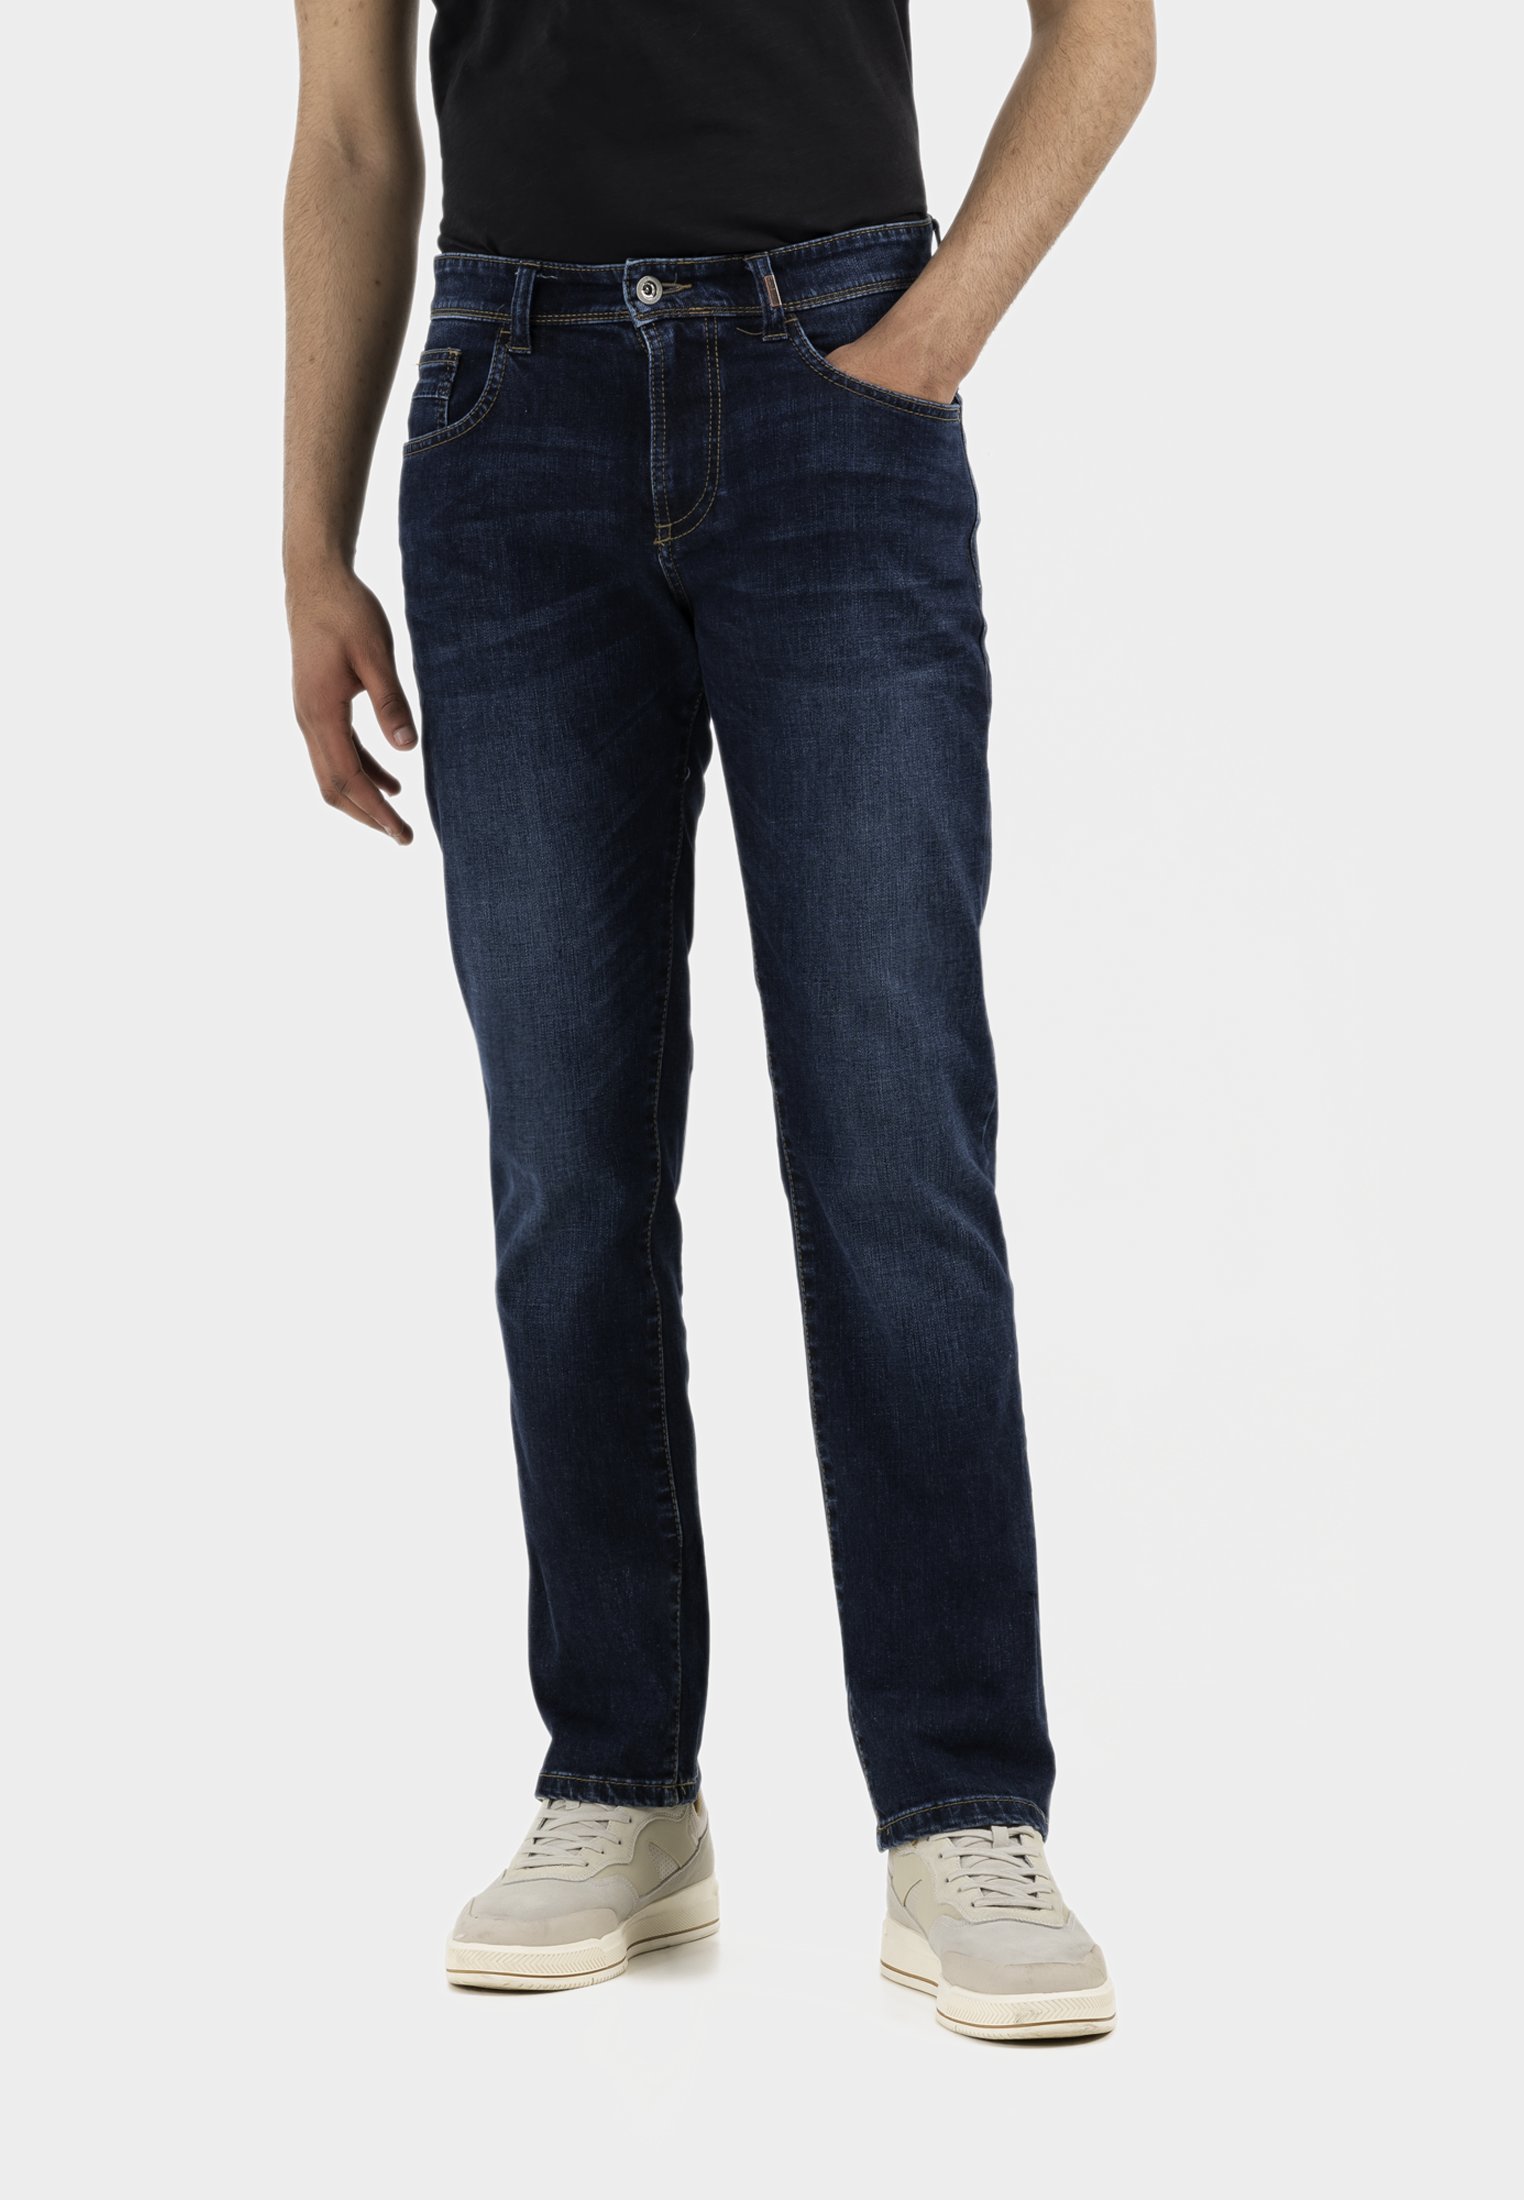 Camel Active Relaxed Fit 5-Pocket Jeans in cotton